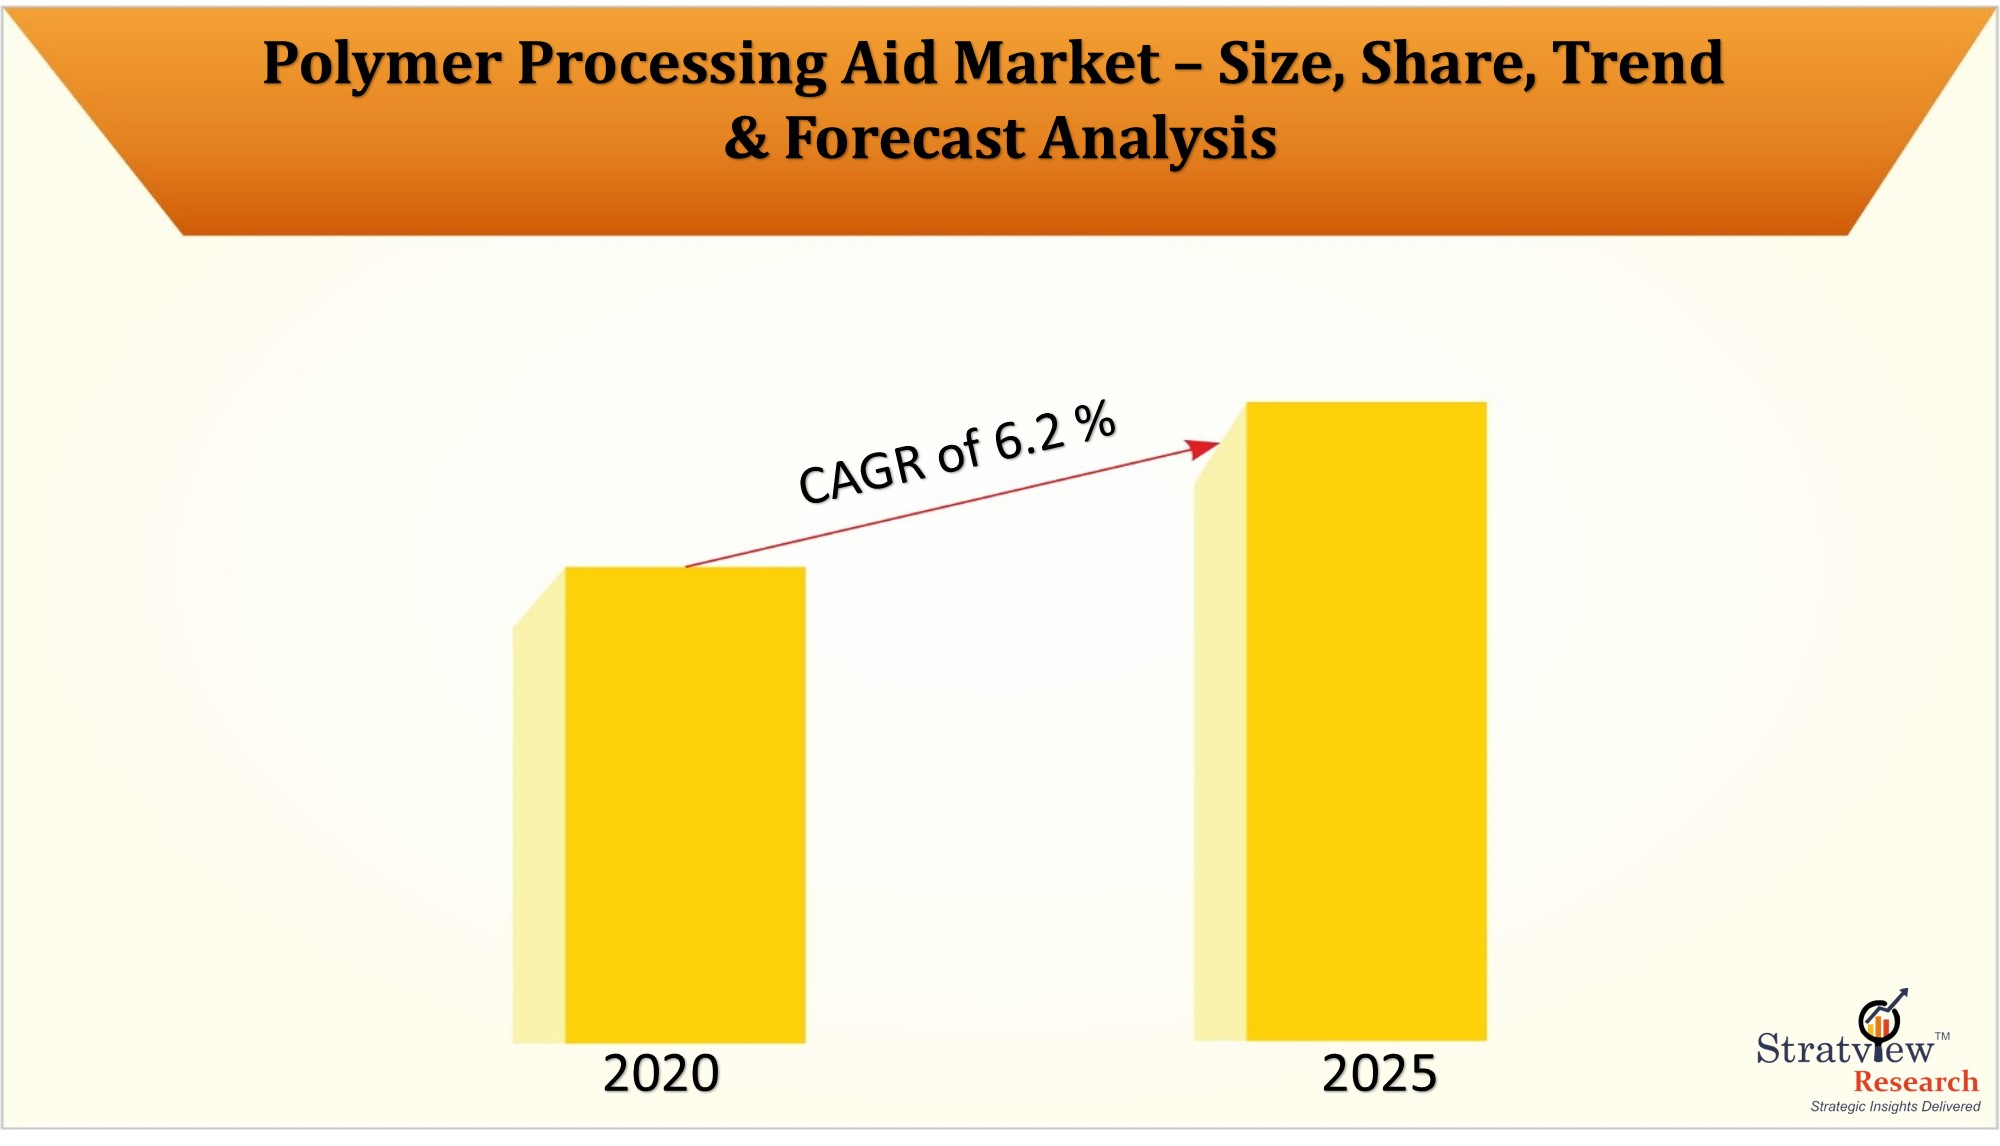 Polymer Processing Aid Market to offer a healthy CAGR of 6.2% during 2020-25